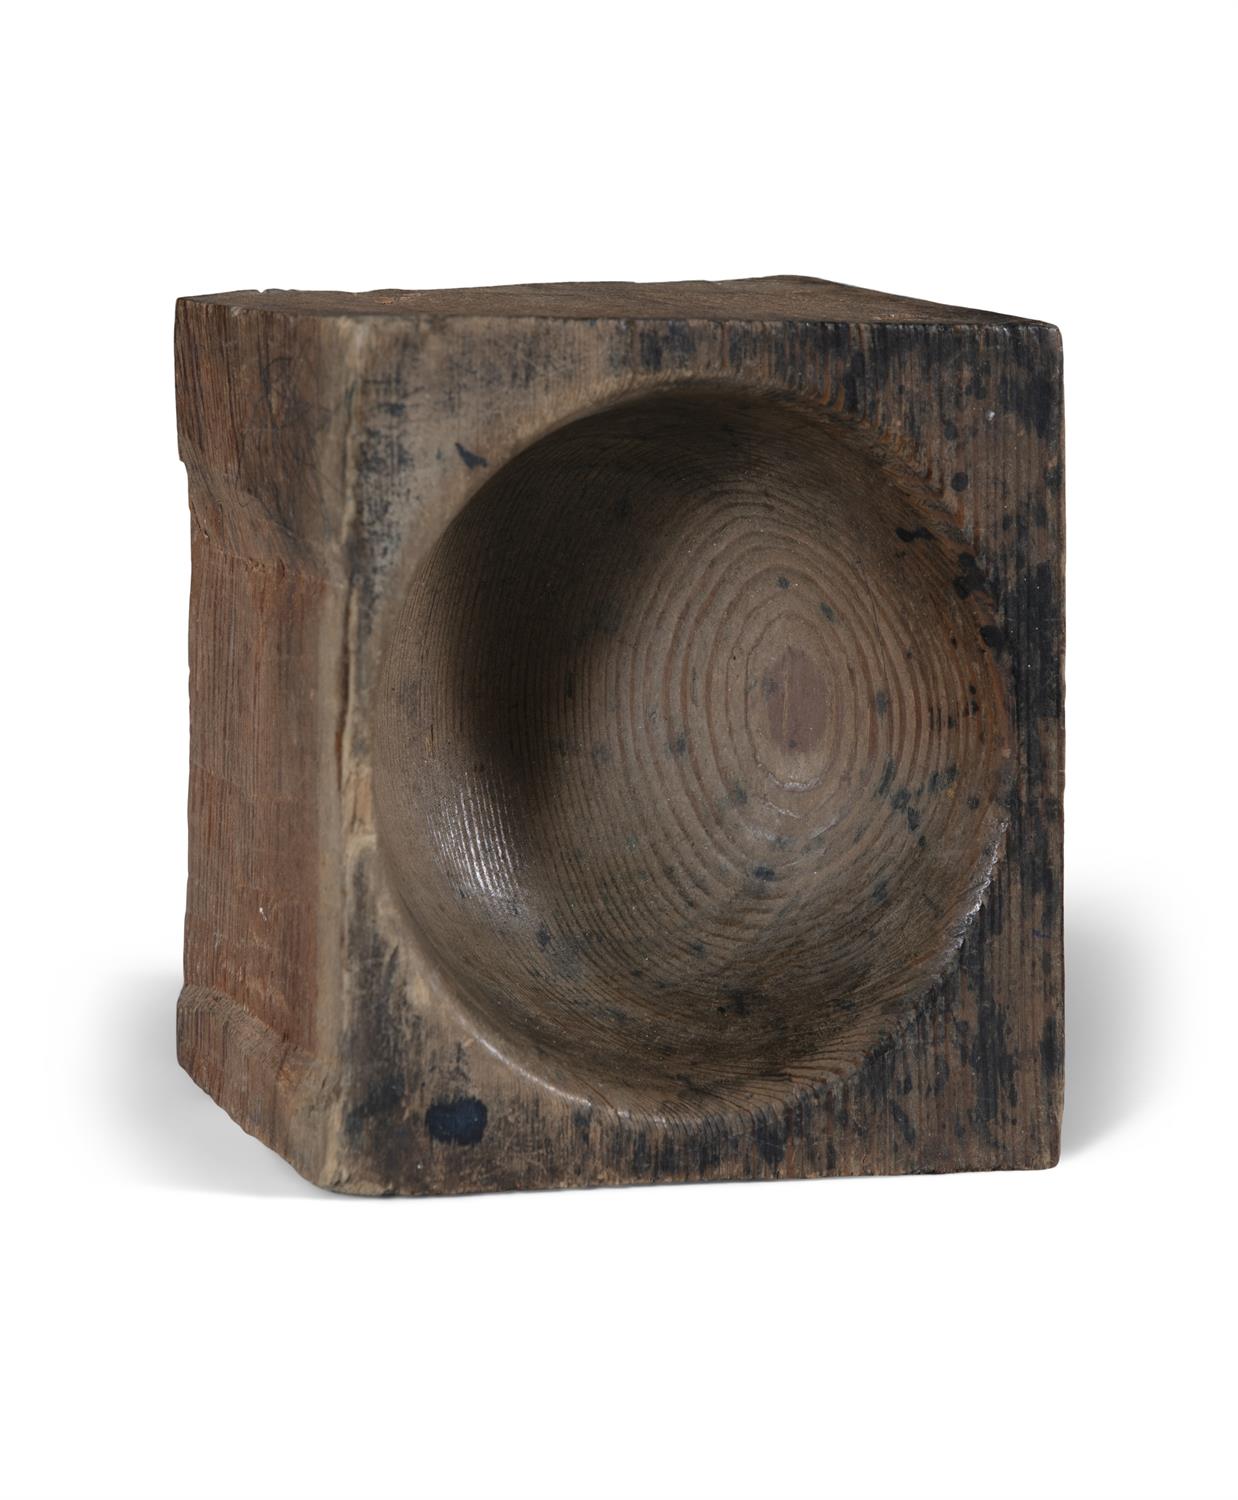 A PAIR OF TIMBER SQUARE SHAPED BLOCK PINE COUNTER WELLS 19cm high, 14cm wide, 15cm deep - Image 3 of 3